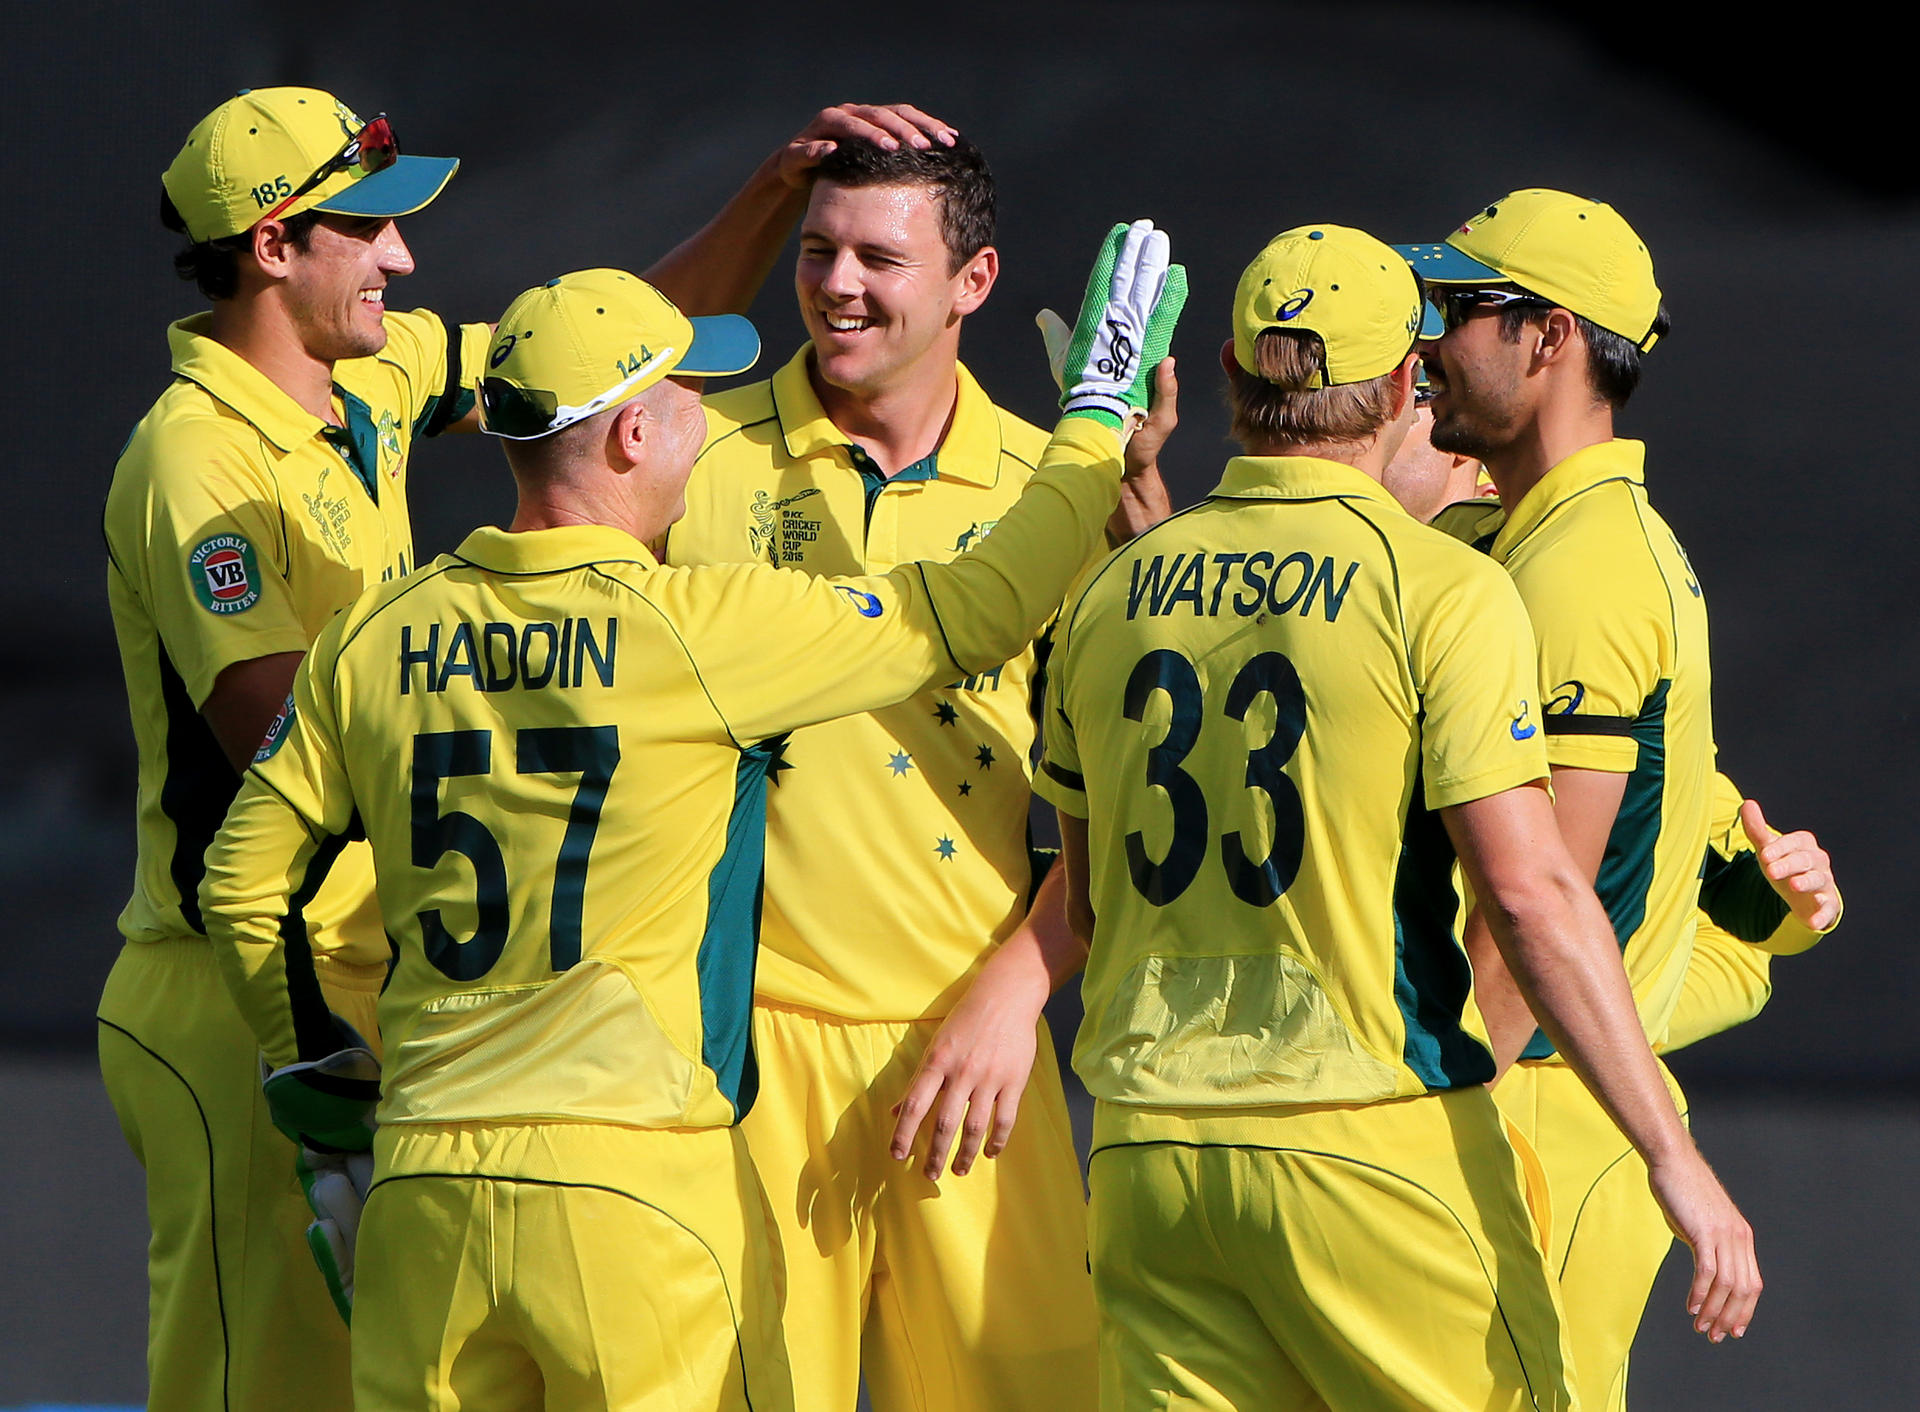 Australia's Josh Hazlewood is congratulated by teammates after taking the wicket of Pakistan's Sohaib Maqsood during their World Cup quarter-final in Adelaide.Photo: AP